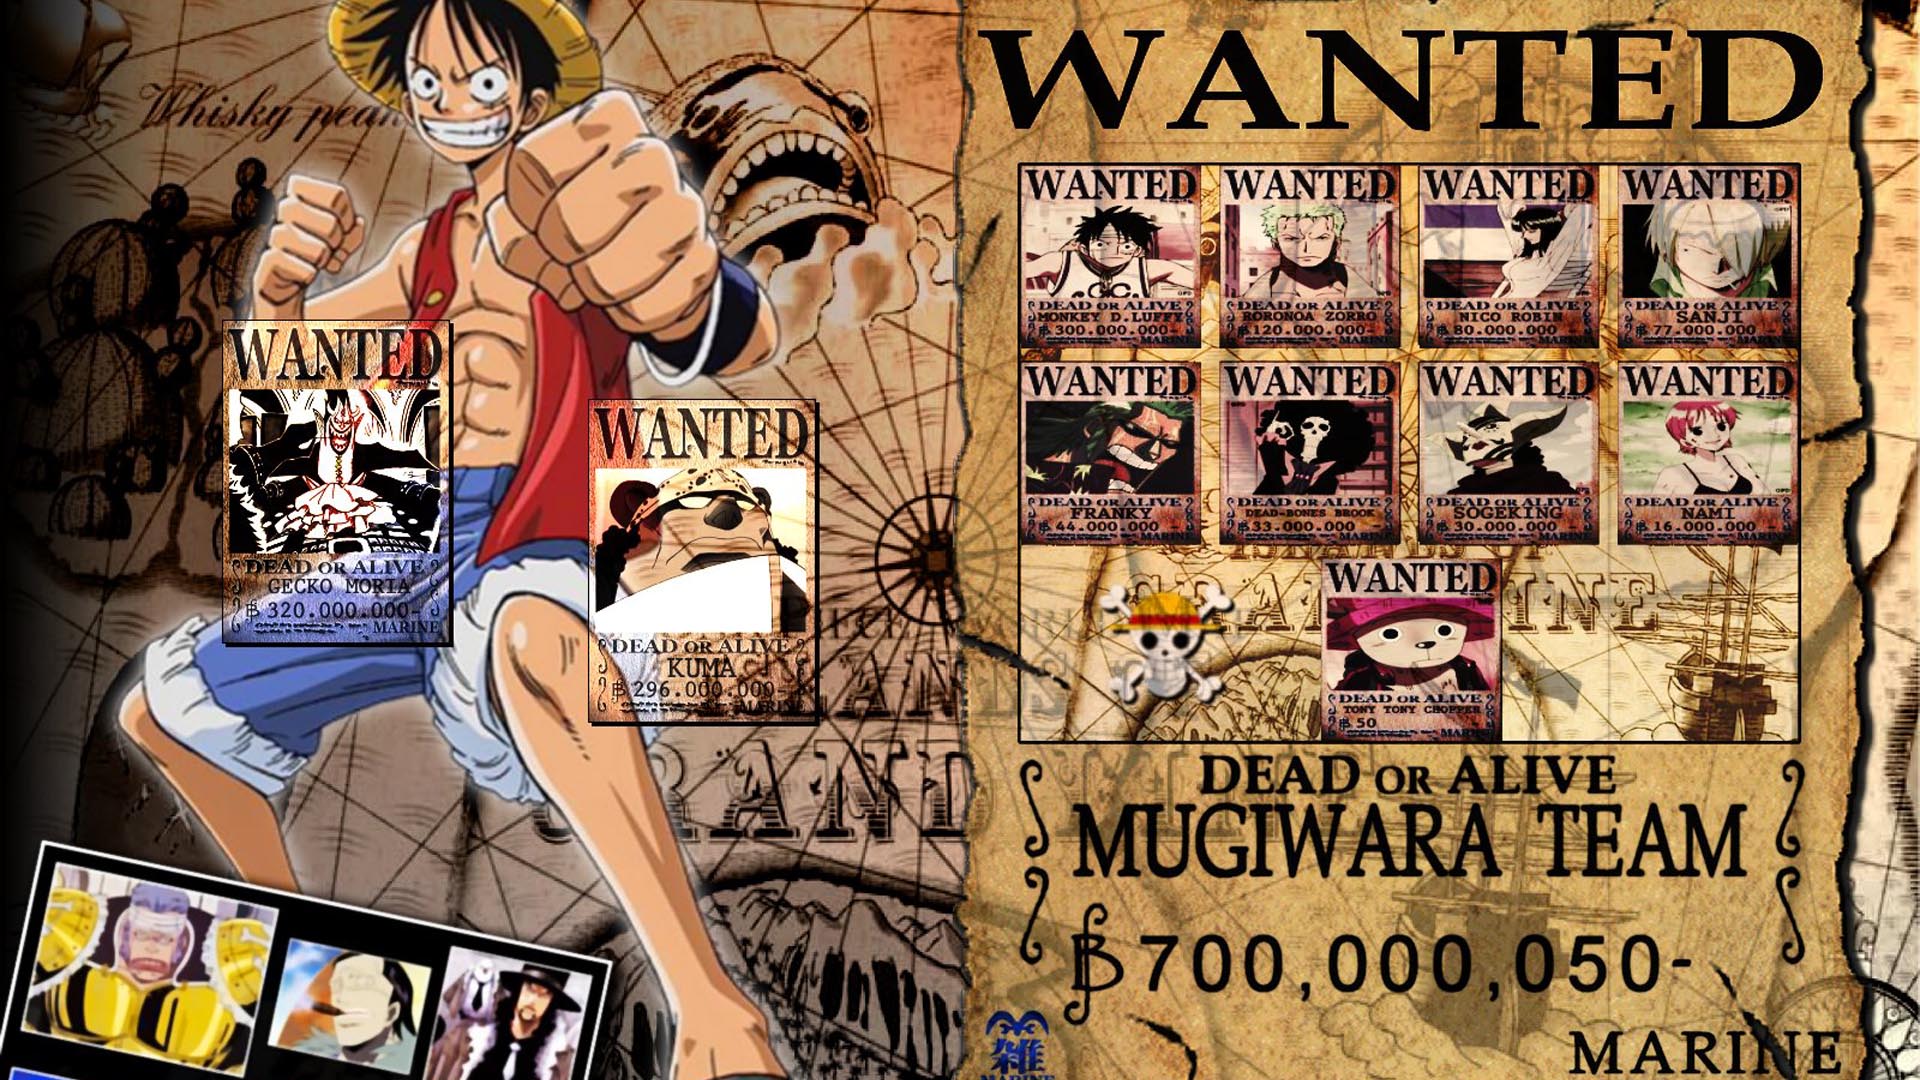 One Piece Wallpaper 1920x1080 Wallpapers, 1920x1080 Wallpapers ...